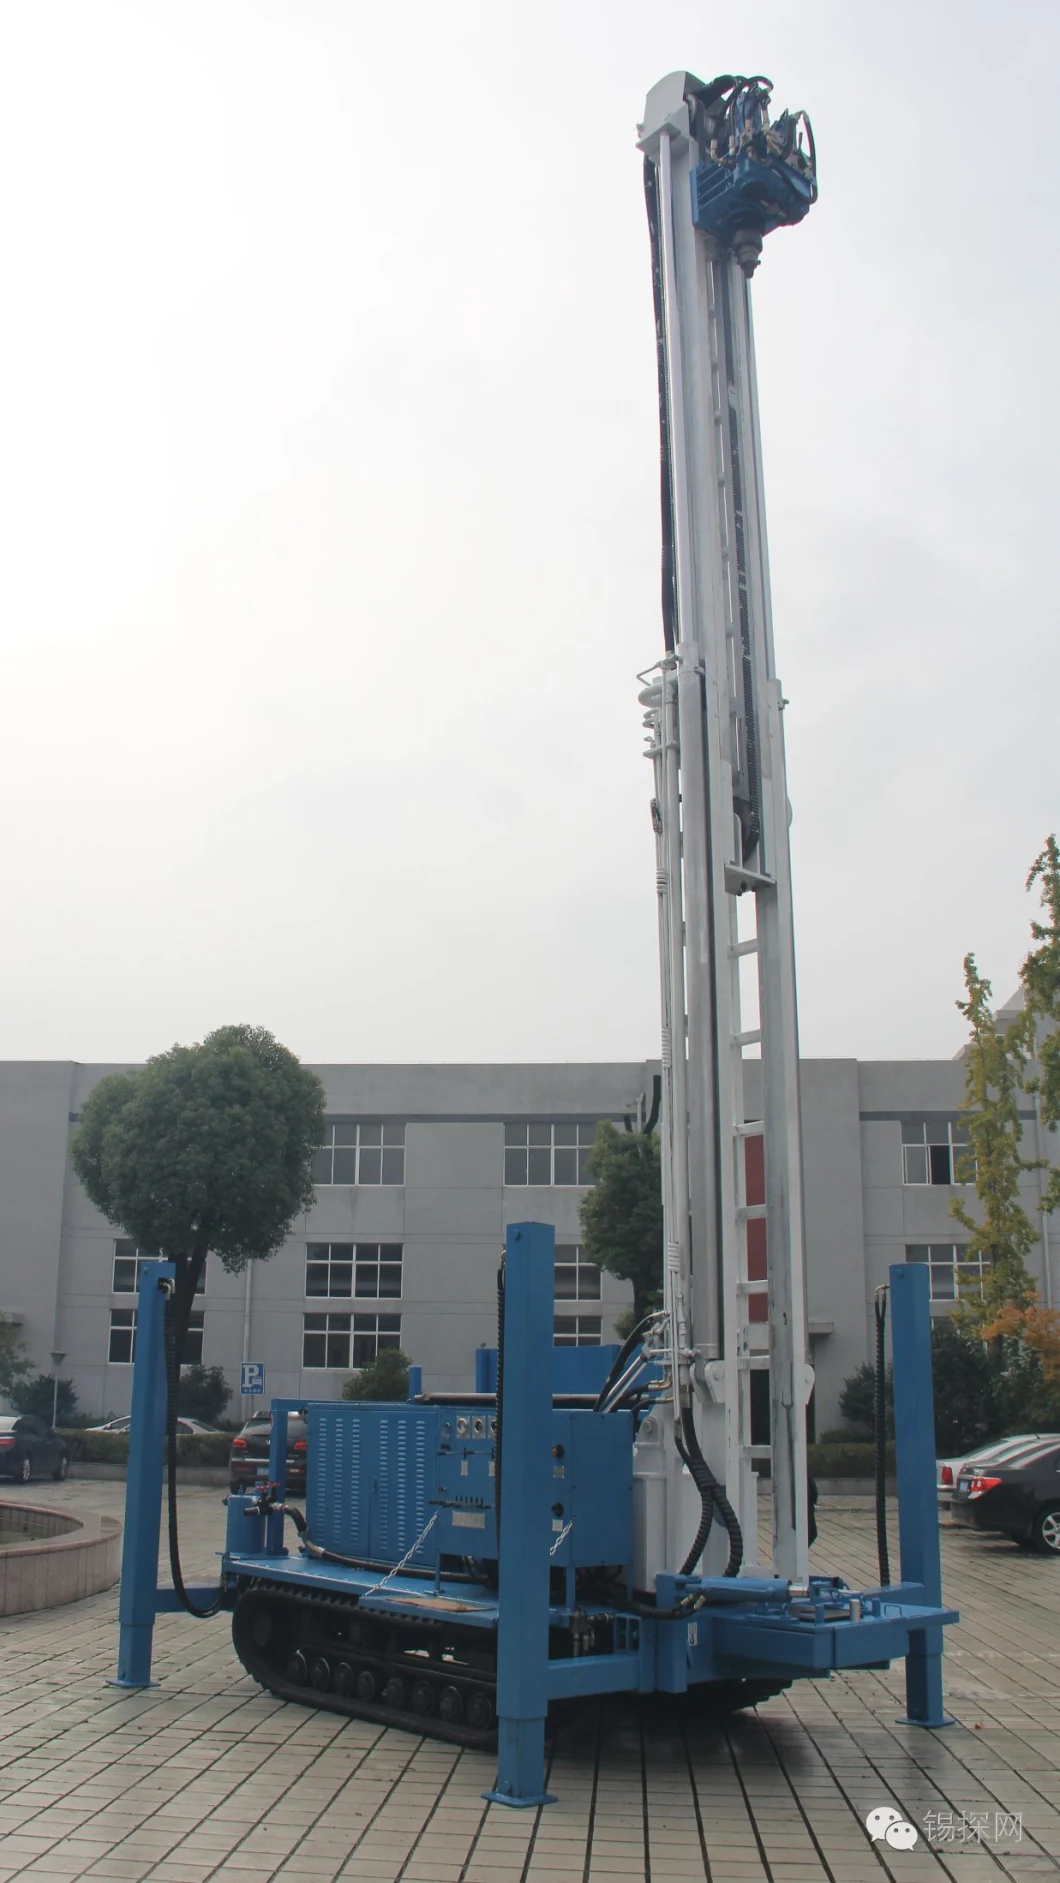 Ydl-300 Multi-Function and Full Hydraulic Water Well Drilling Rig